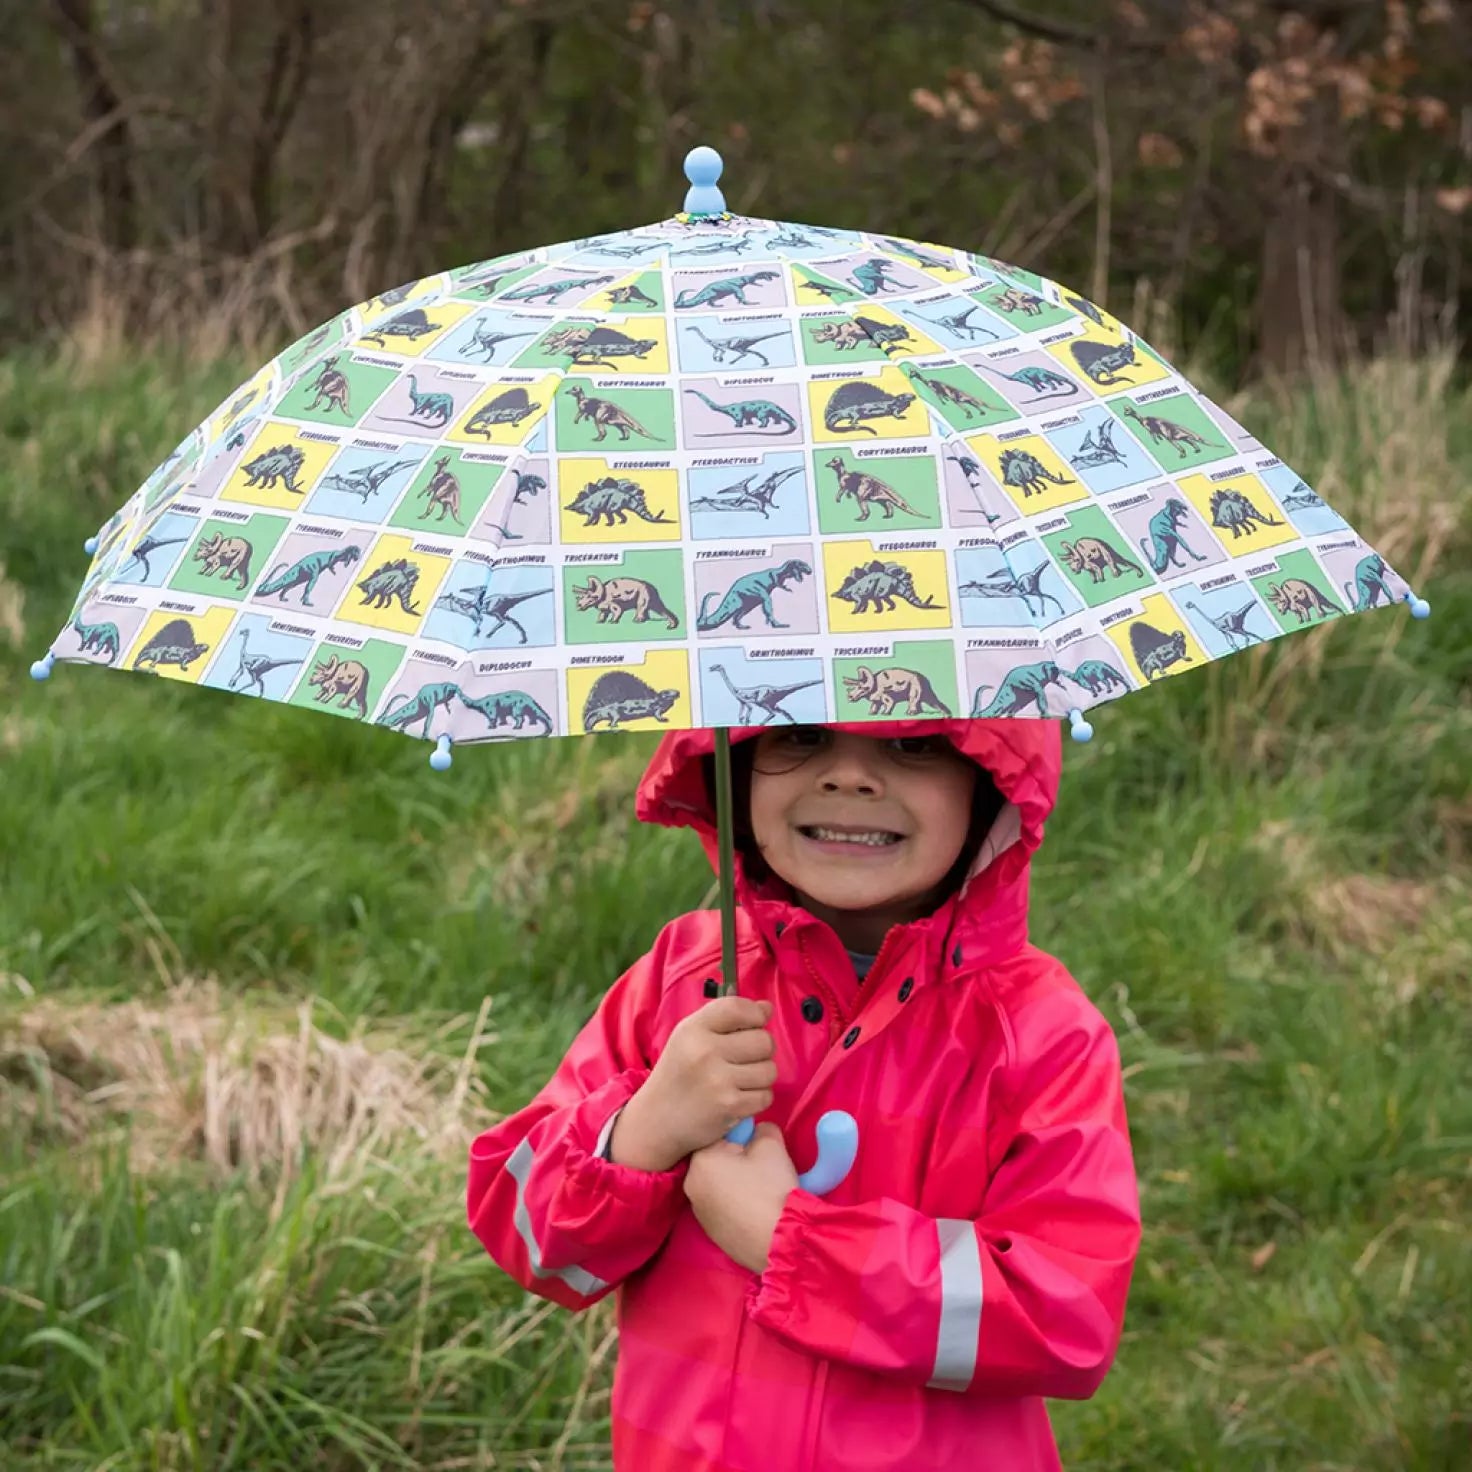 A childs umbrella by Rex London, style Prehistoric Land, in blue, green and yellow multi dino print and blue handle. Angled view of umbrella open. Lifestyle view.